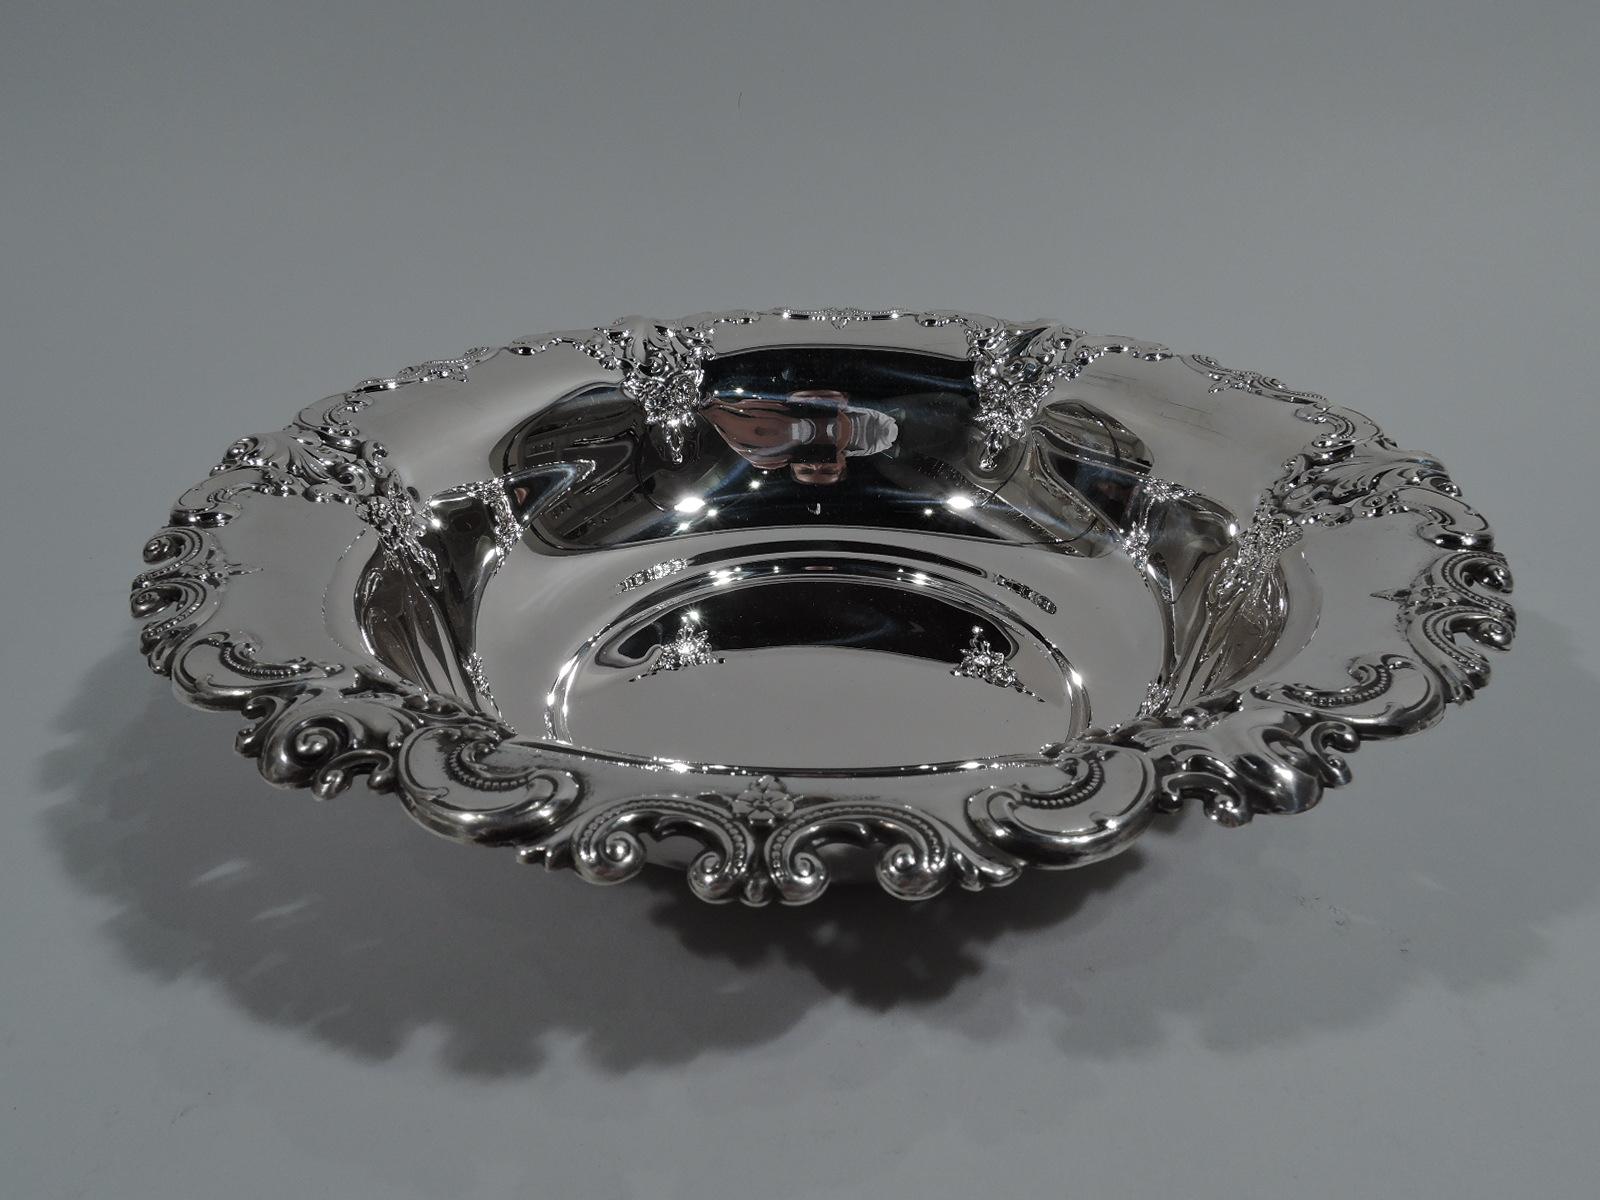 Sterling silver serving bowl in Grande Baroque. Made by Wallace in Wallingford, Conn. Deep and round with irregular scrolled rim and pendant flower bunches. A great hollowware piece in the Classic pattern. Fully marked including maker’s stamp,